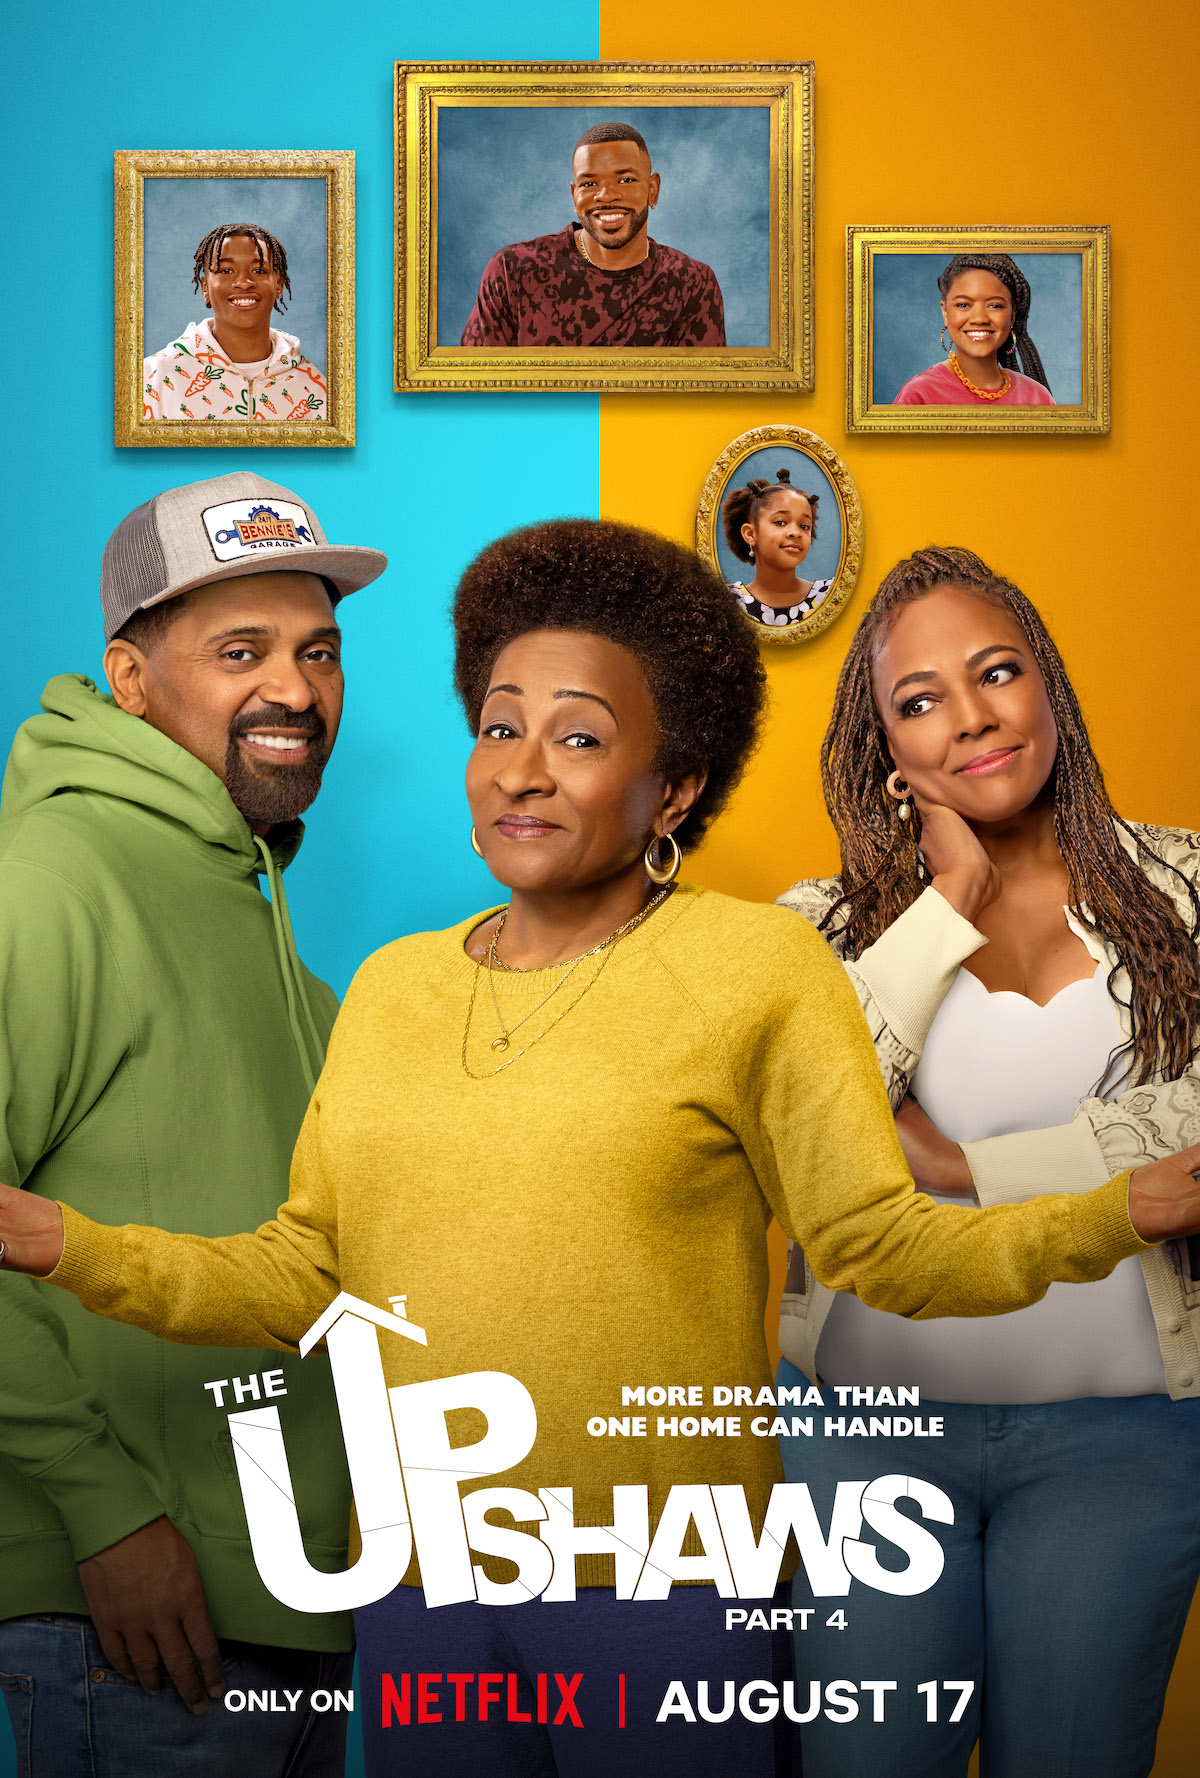 The Upshaws Part 4 First Look Images and Key art